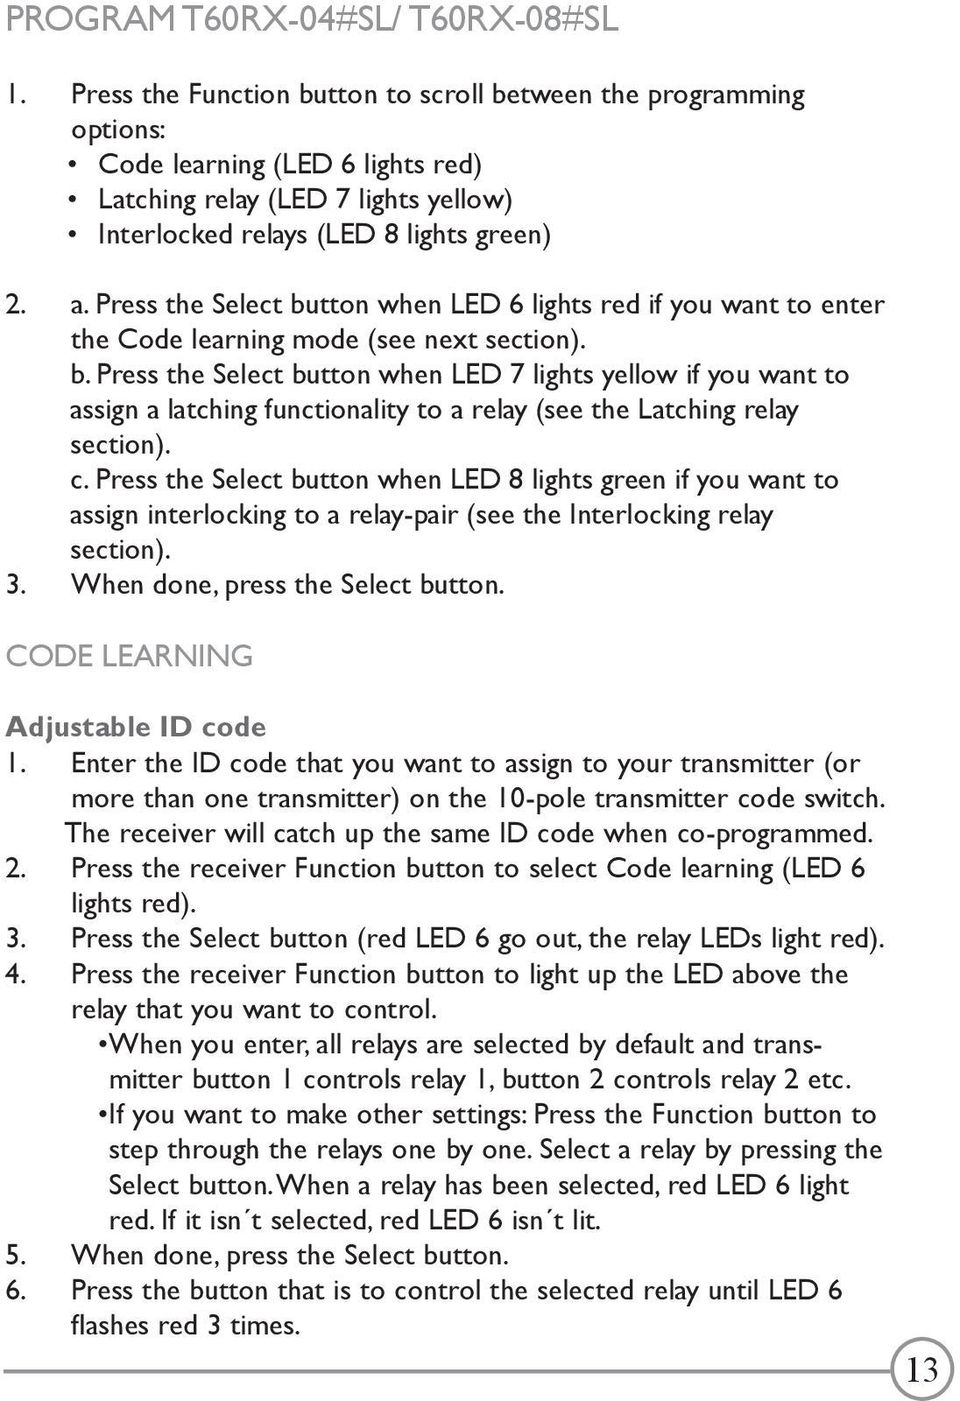 Press the Select button when LED 6 lights red if you want to enter the Code learning mode (see next section). b. Press the Select button when LED 7 lights yellow if you want to assign a latching functionality to a relay (see the Latching relay section).